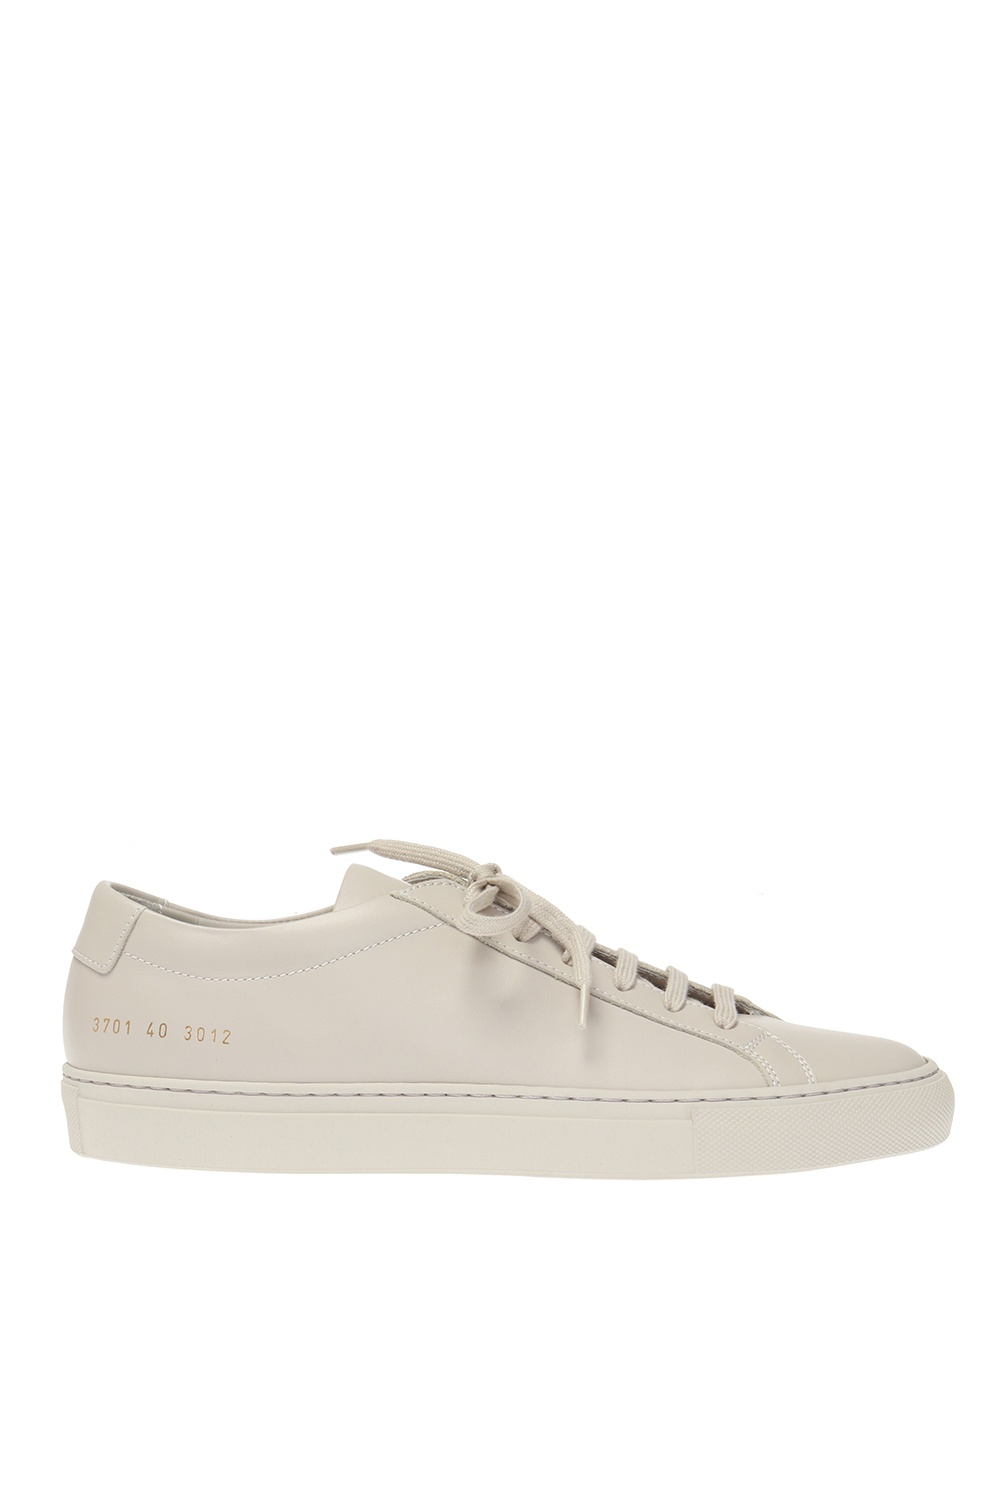 Common Projects Us Online, 58% OFF | www.emanagreen.com